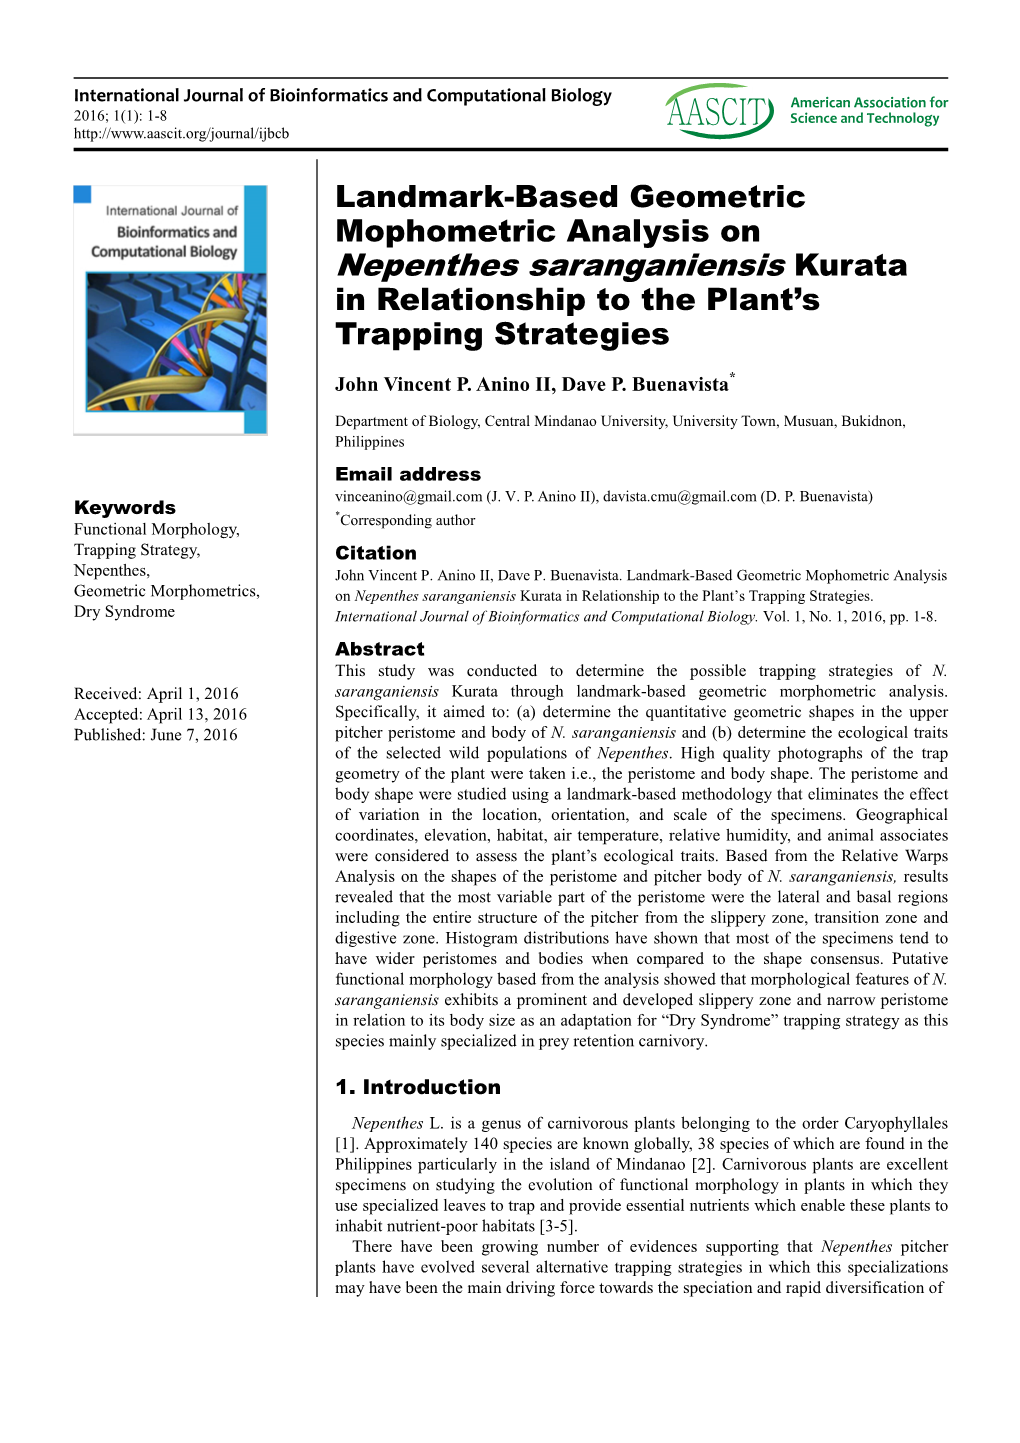 Nepenthes Saranganiensis Kurata in Relationship to the Plant’S Trapping Strategies